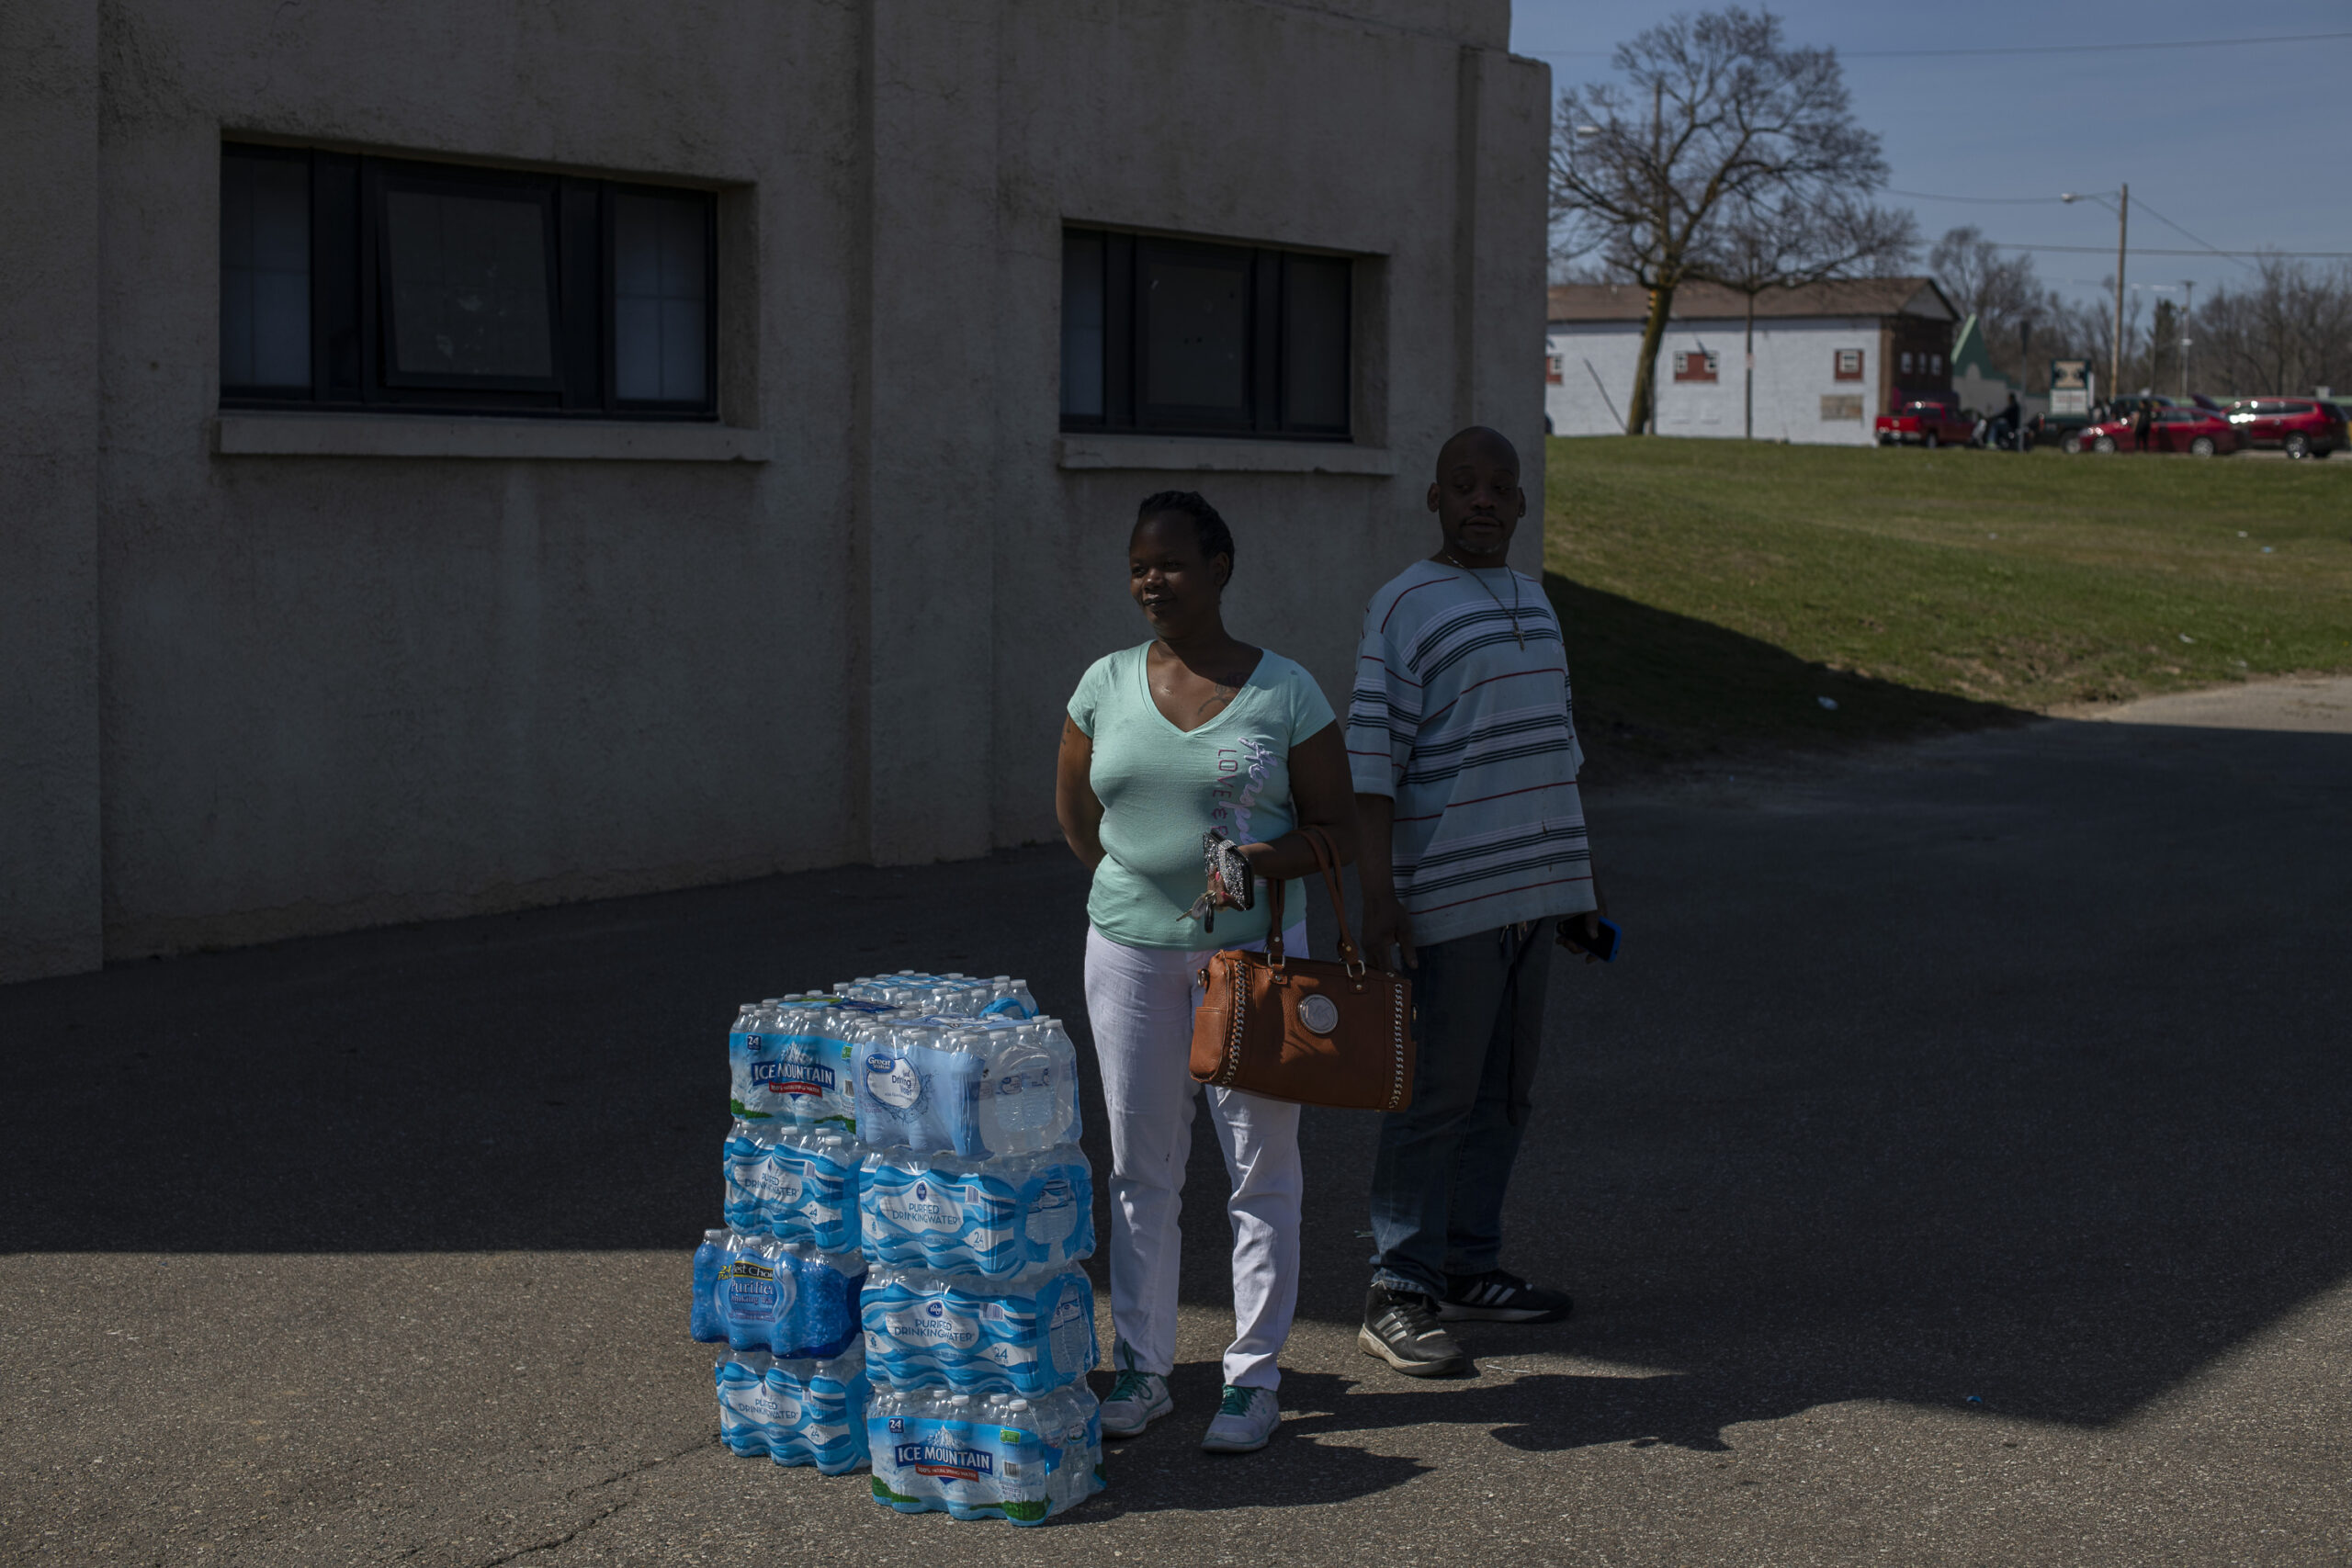 A Black woman and man stand next to a stack of packages of bottled water on the pavement in the shadow of a concrete building.